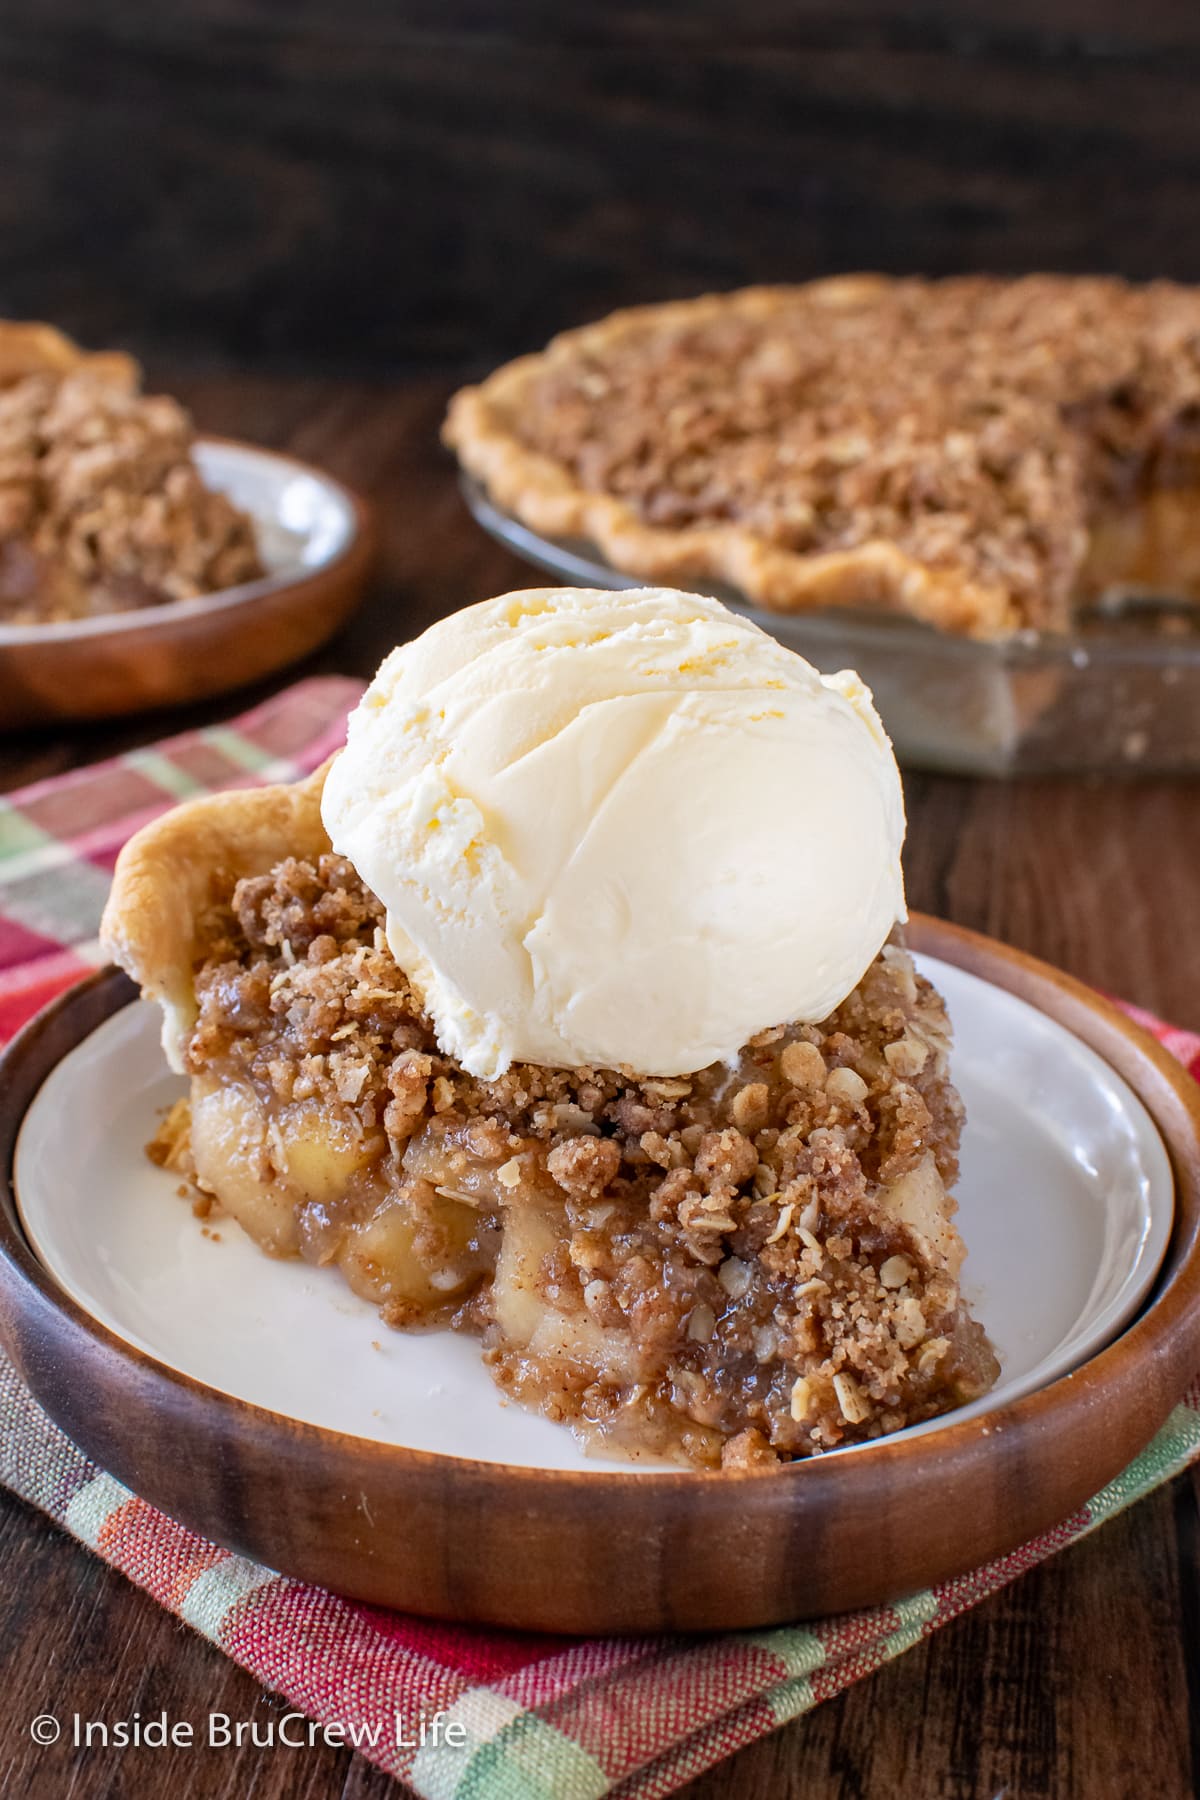 A slice of crumble pie topped with ice cream.